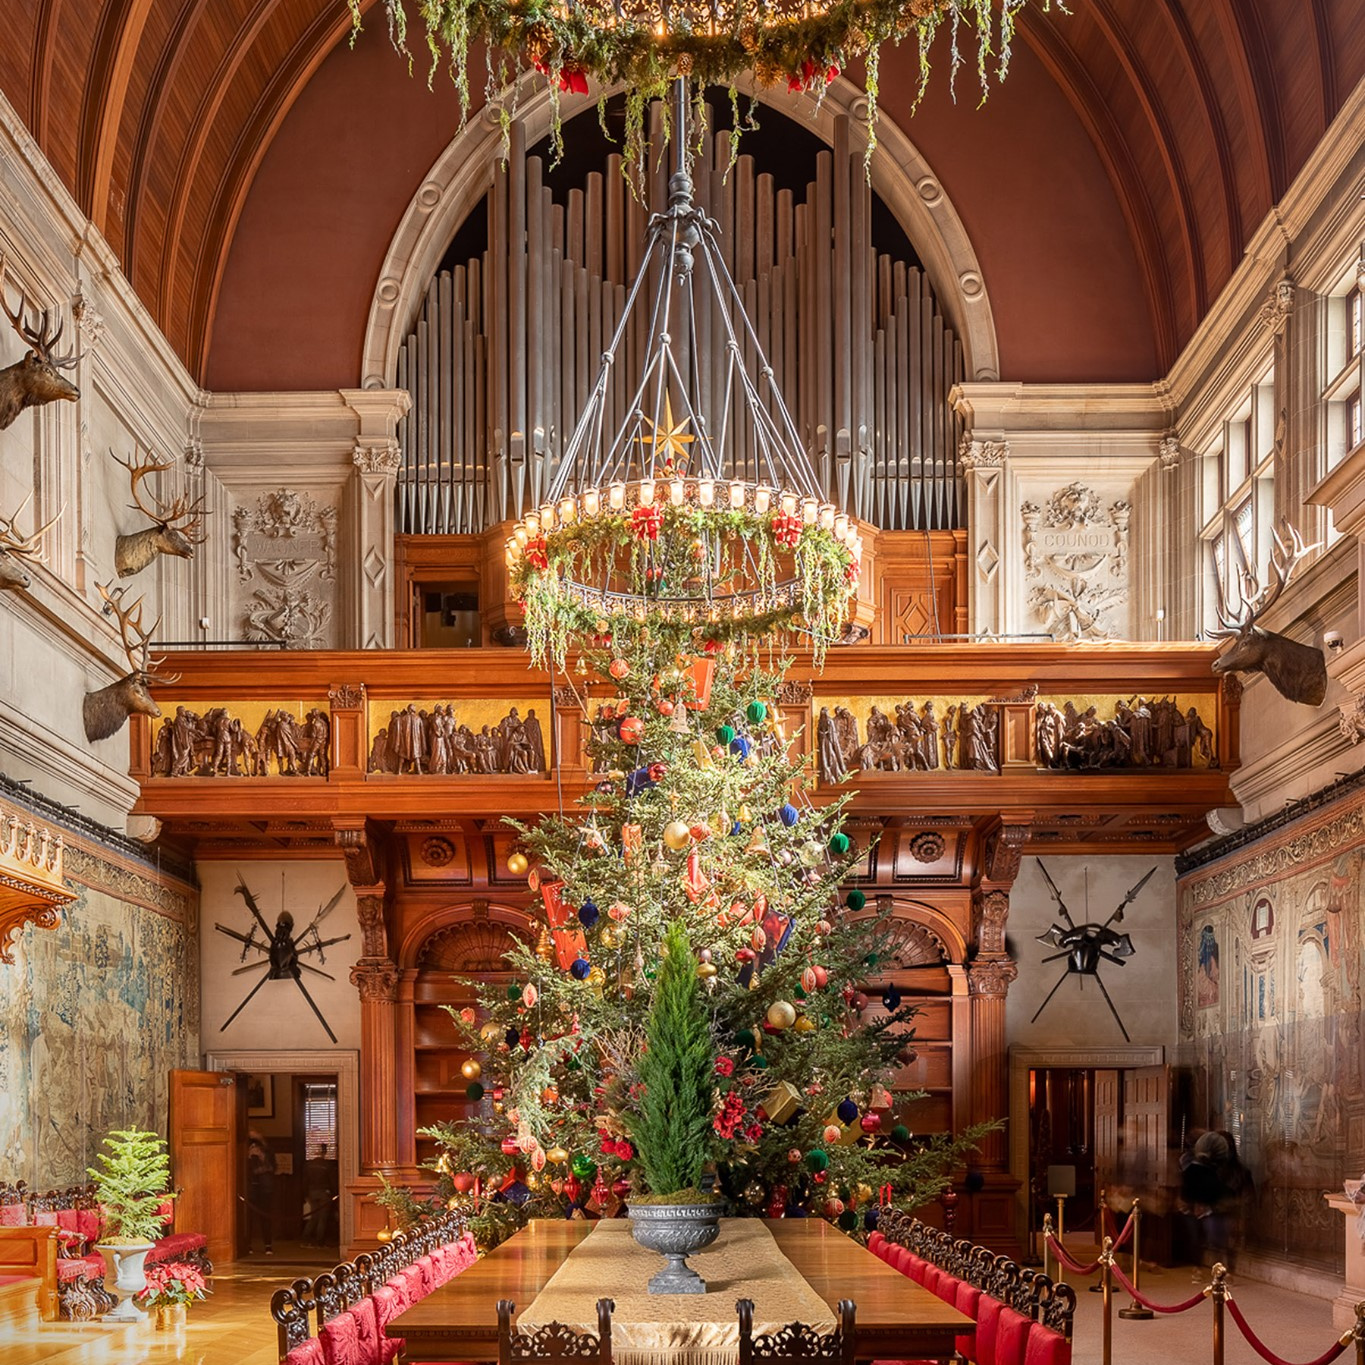 What Can We Learn from Biltmore and its LongStanding Christmas